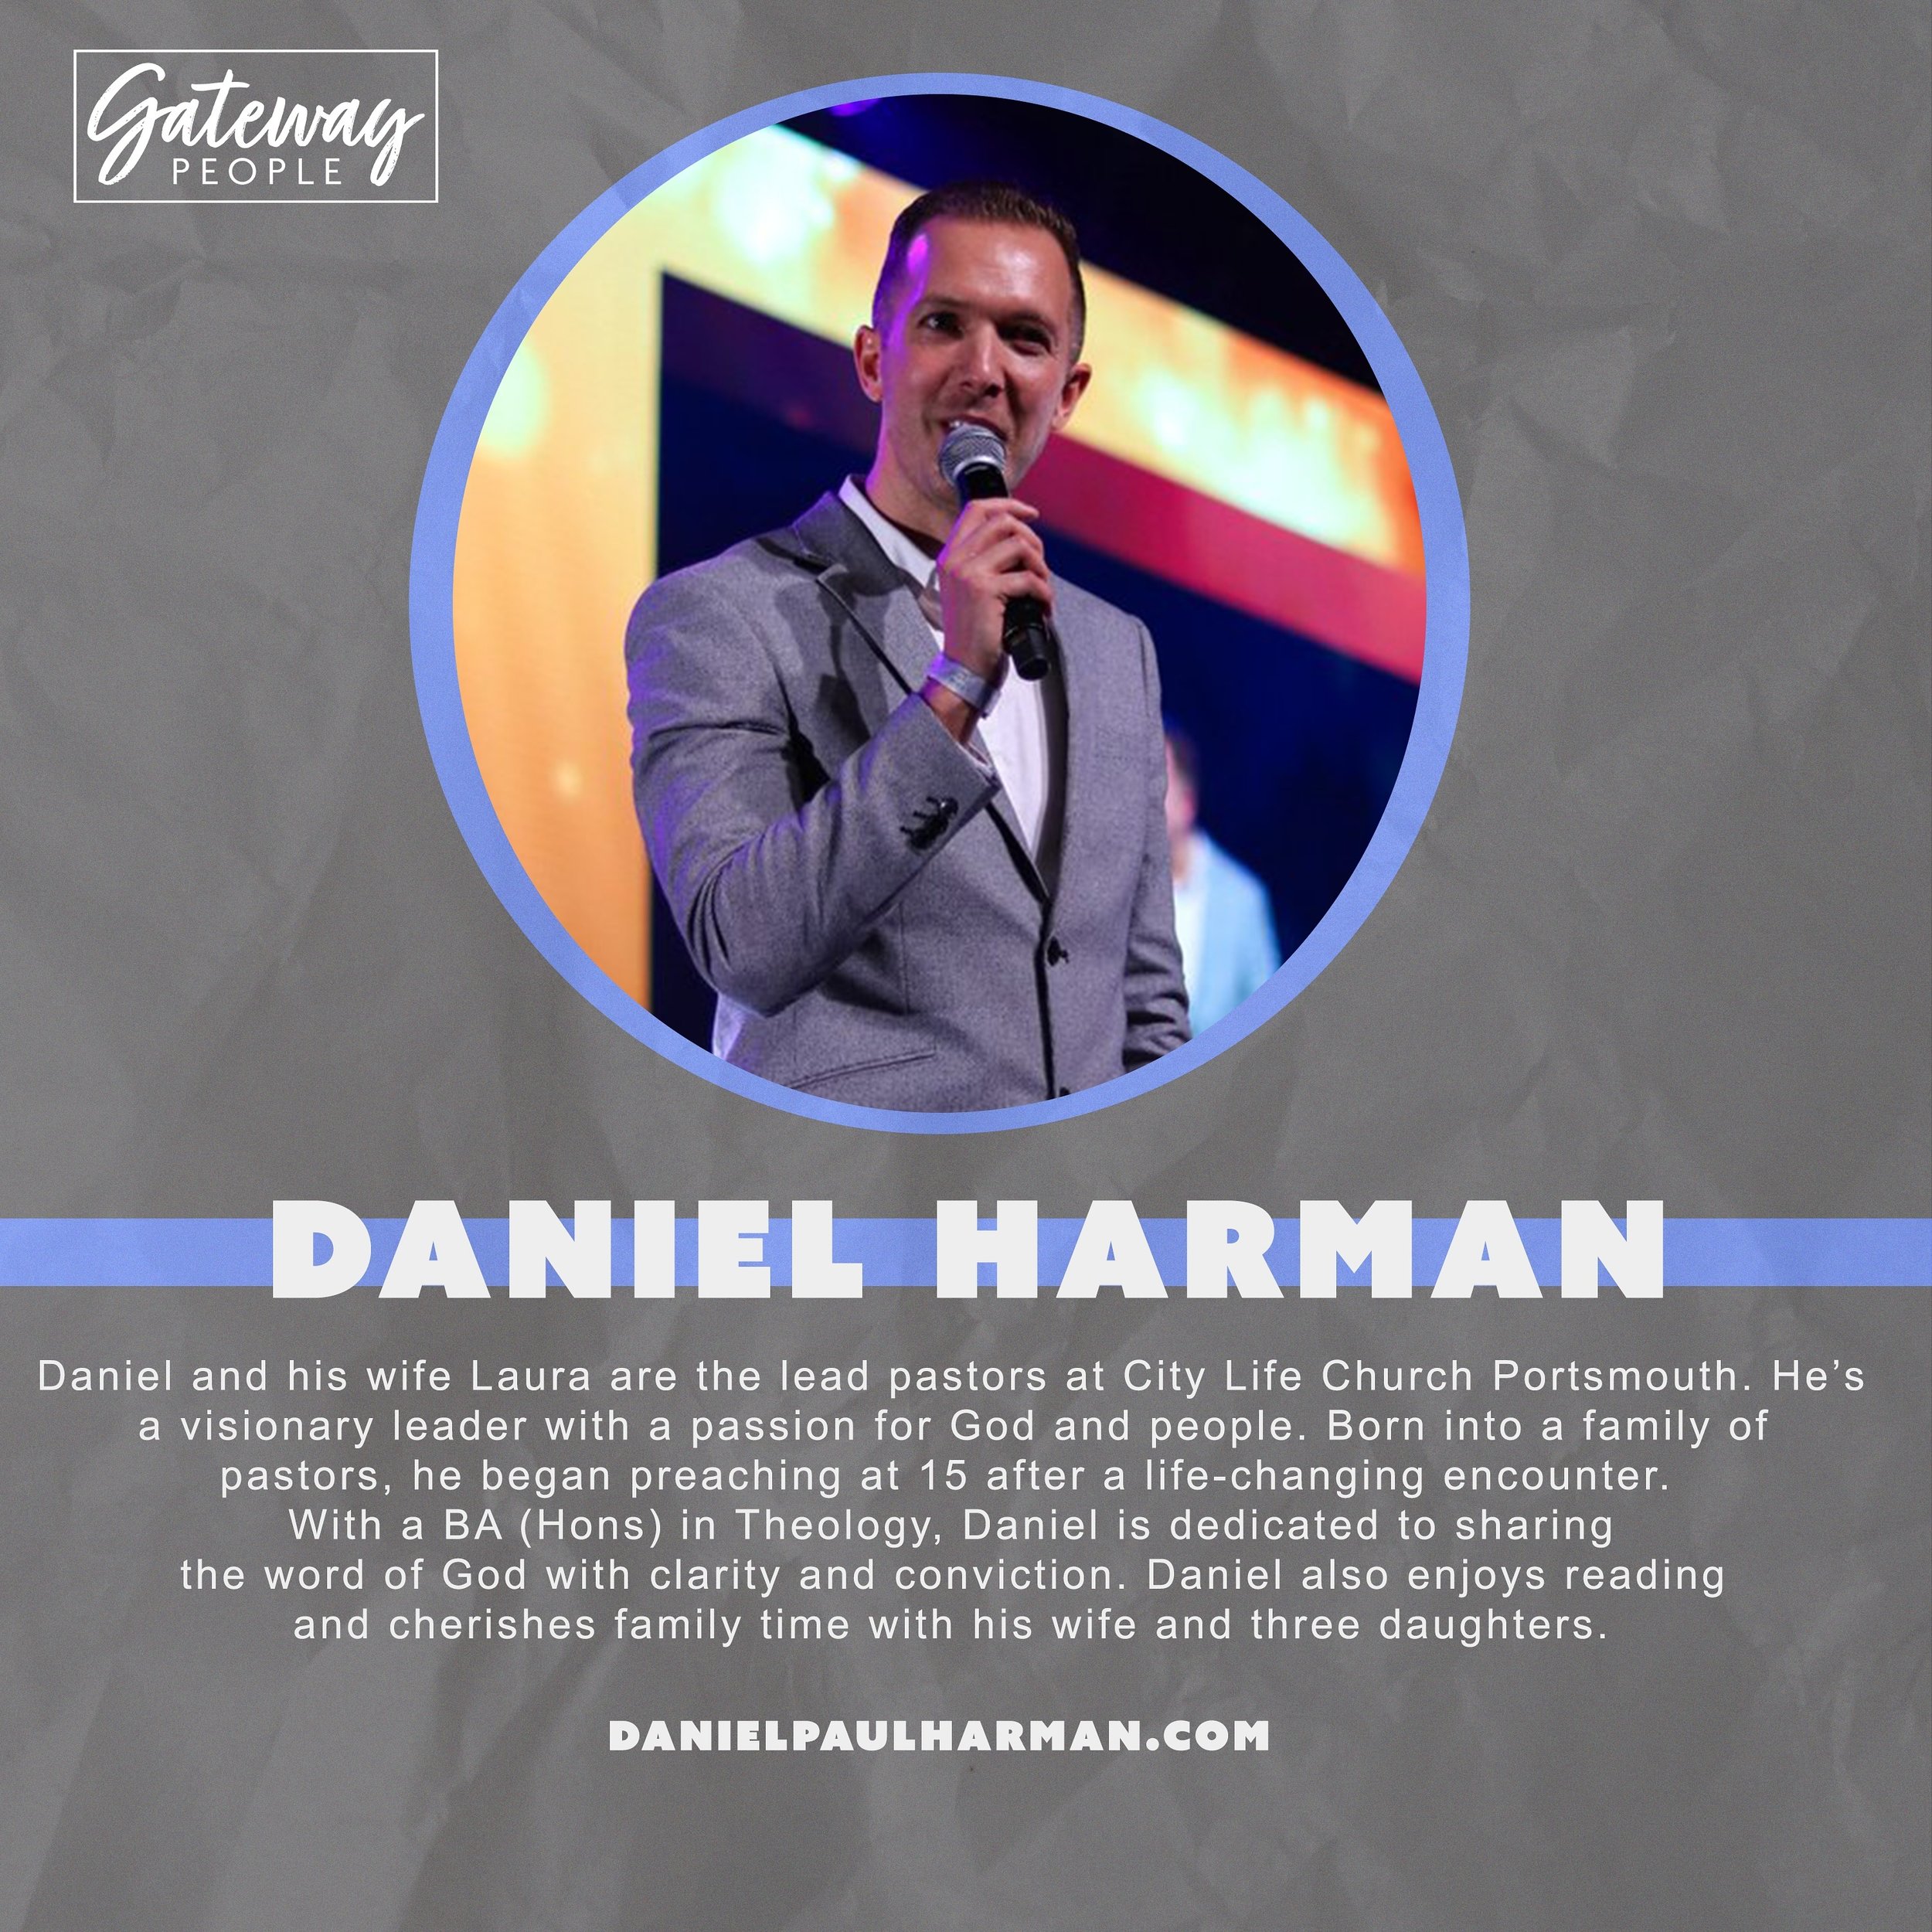 Introducing our first speaker for the Gateway Conference 2024 @danielpharman !!!

💻 Graphic by @taliaharman.thecreative 

#gateway #2024 #conference #more #gateway2024 #citylifechurch #gatewaypeople #portsmouth #church #jesusisking #churchconference